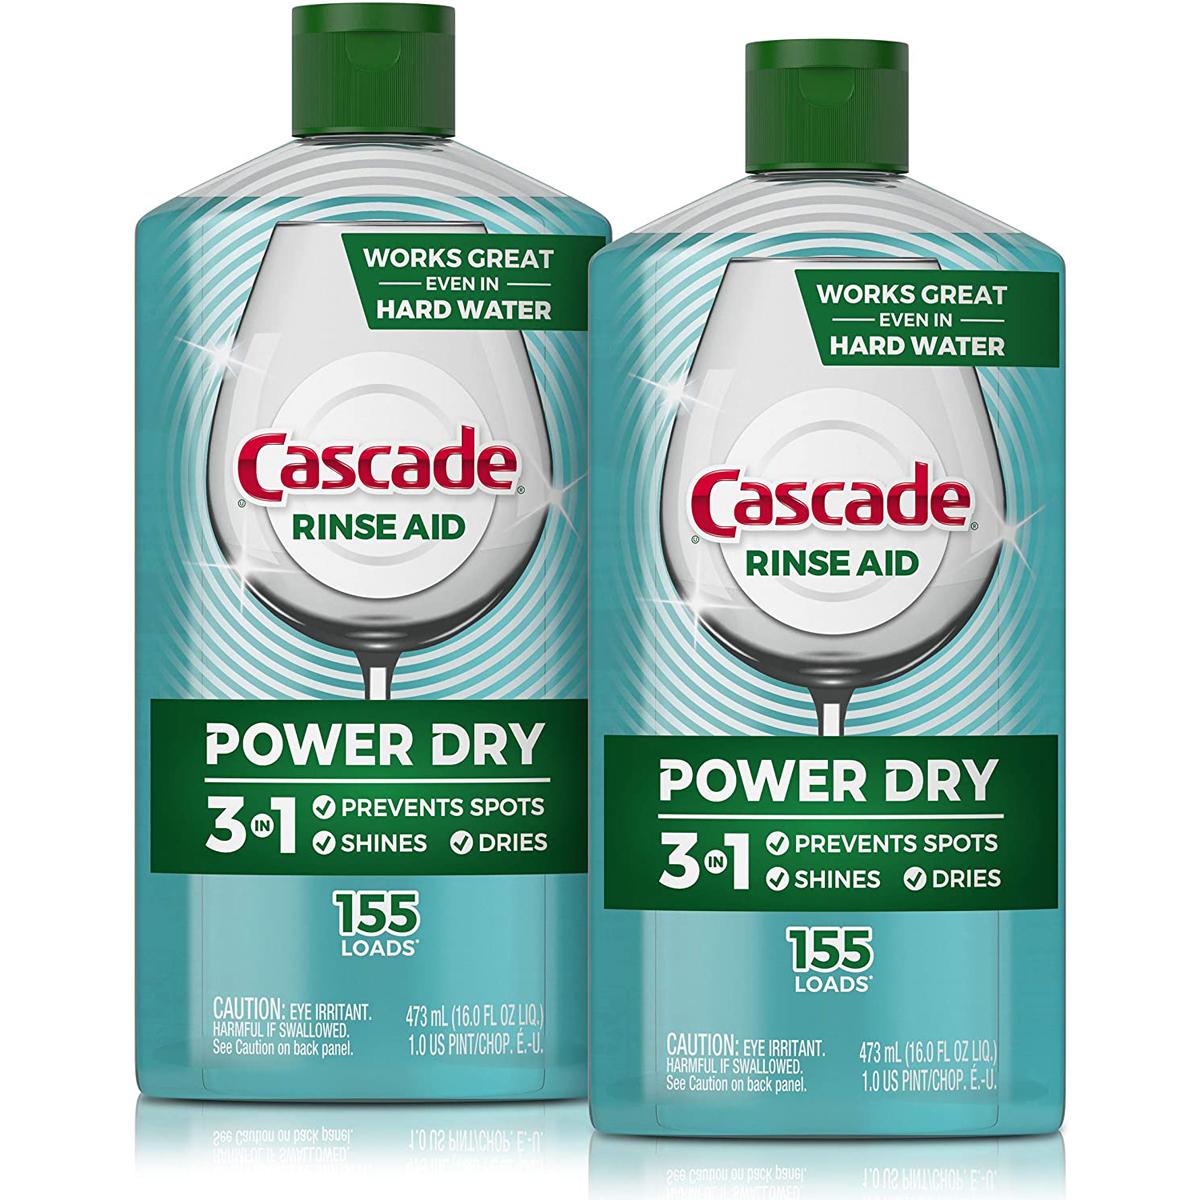 2 Cascade Power Dry Dishwasher Rinse Aid for $8.05 Shipped